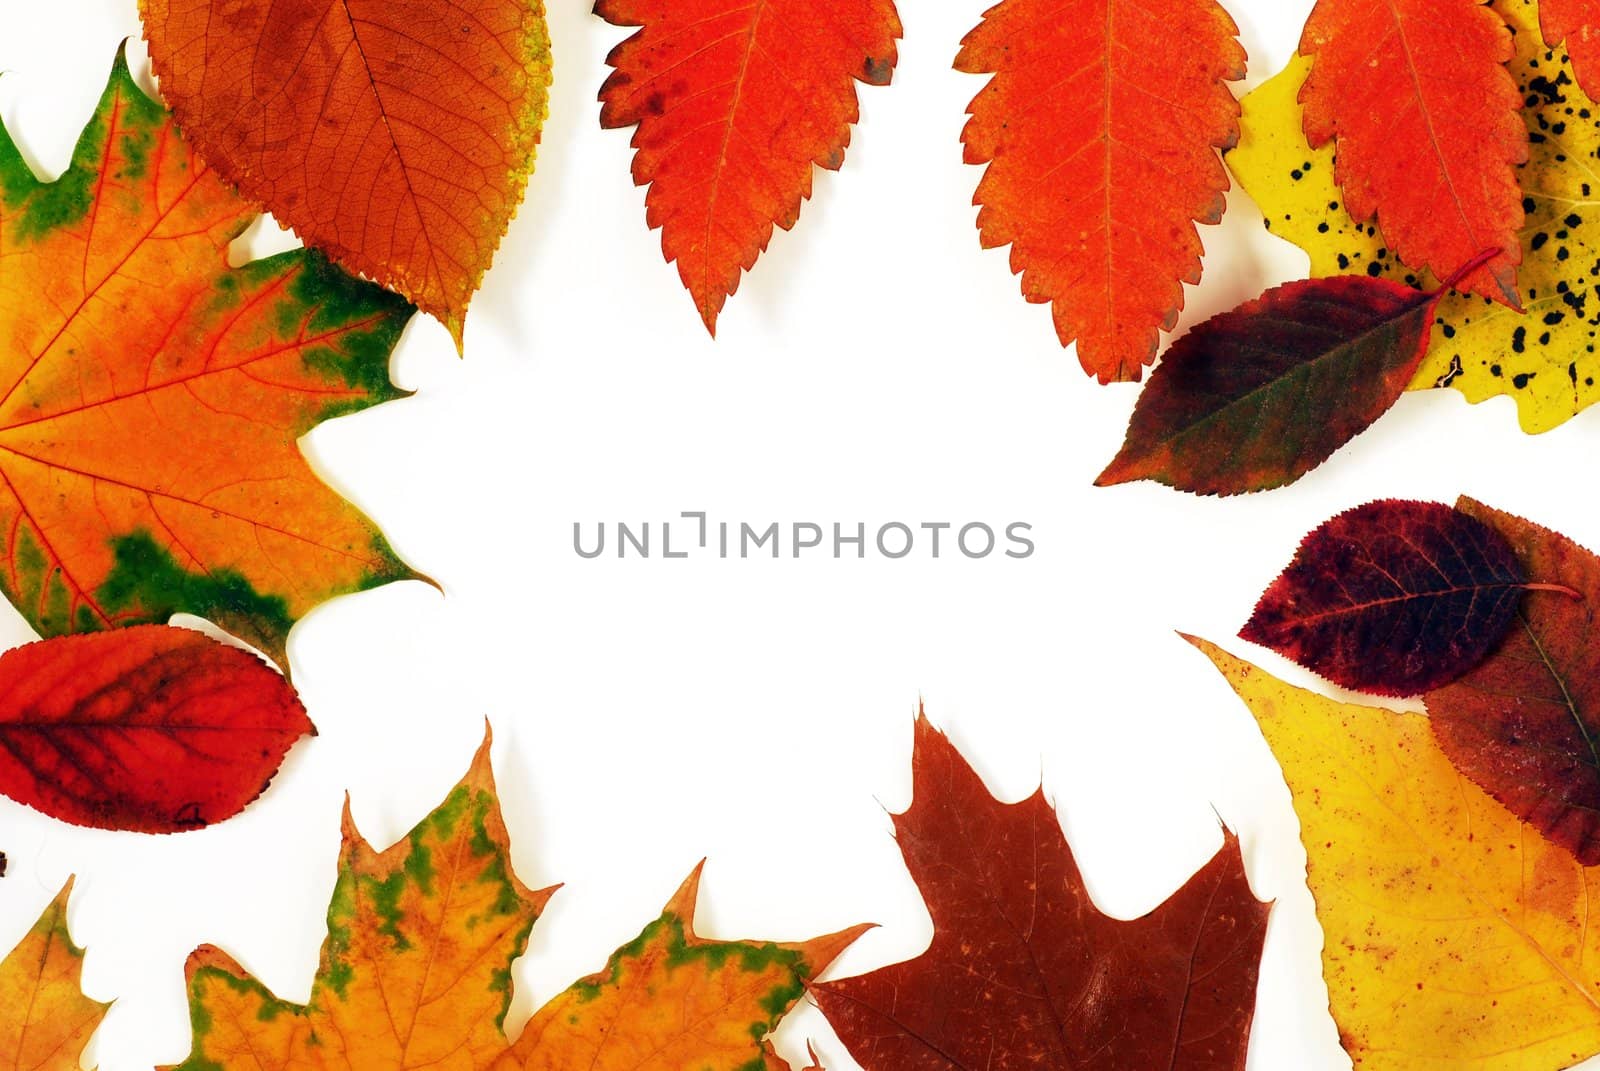 Autumn leaves frame by simply